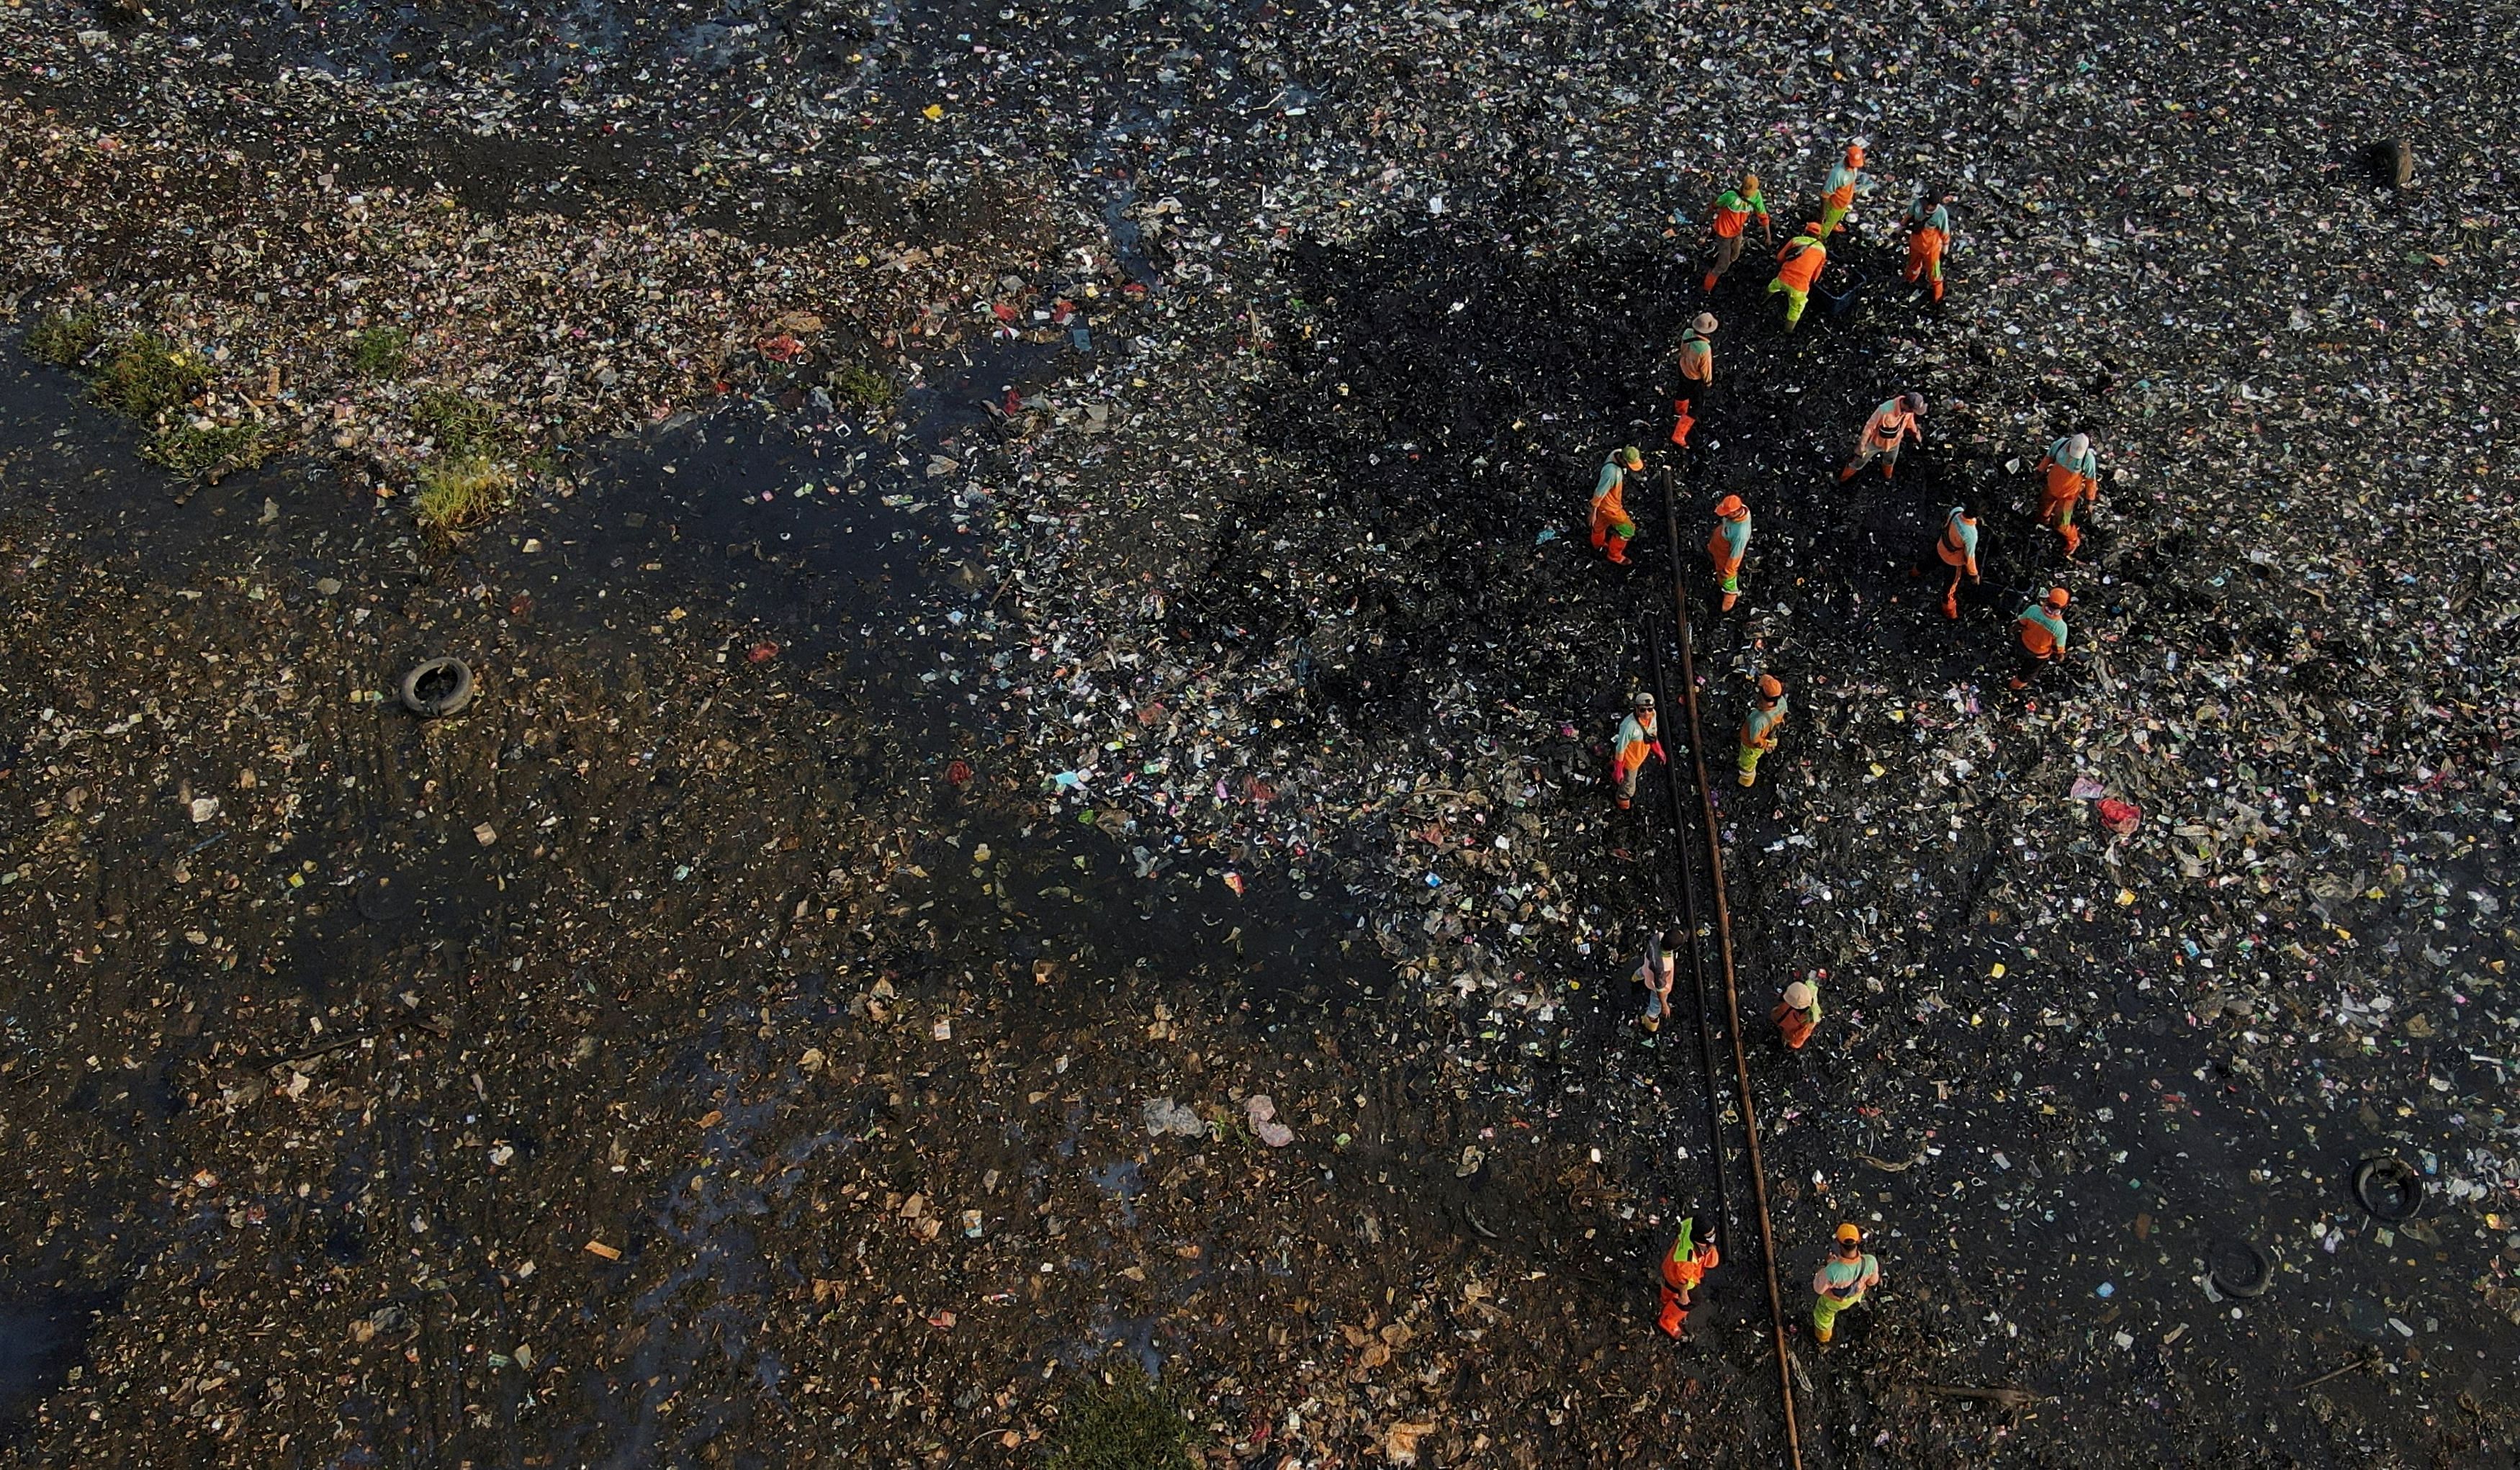 An aerial view show municipality workers collecting garbage, most of which is plastic and domestic waste, during World Oceans Day along the shore of Jakarta. Credit: Reuters Photo